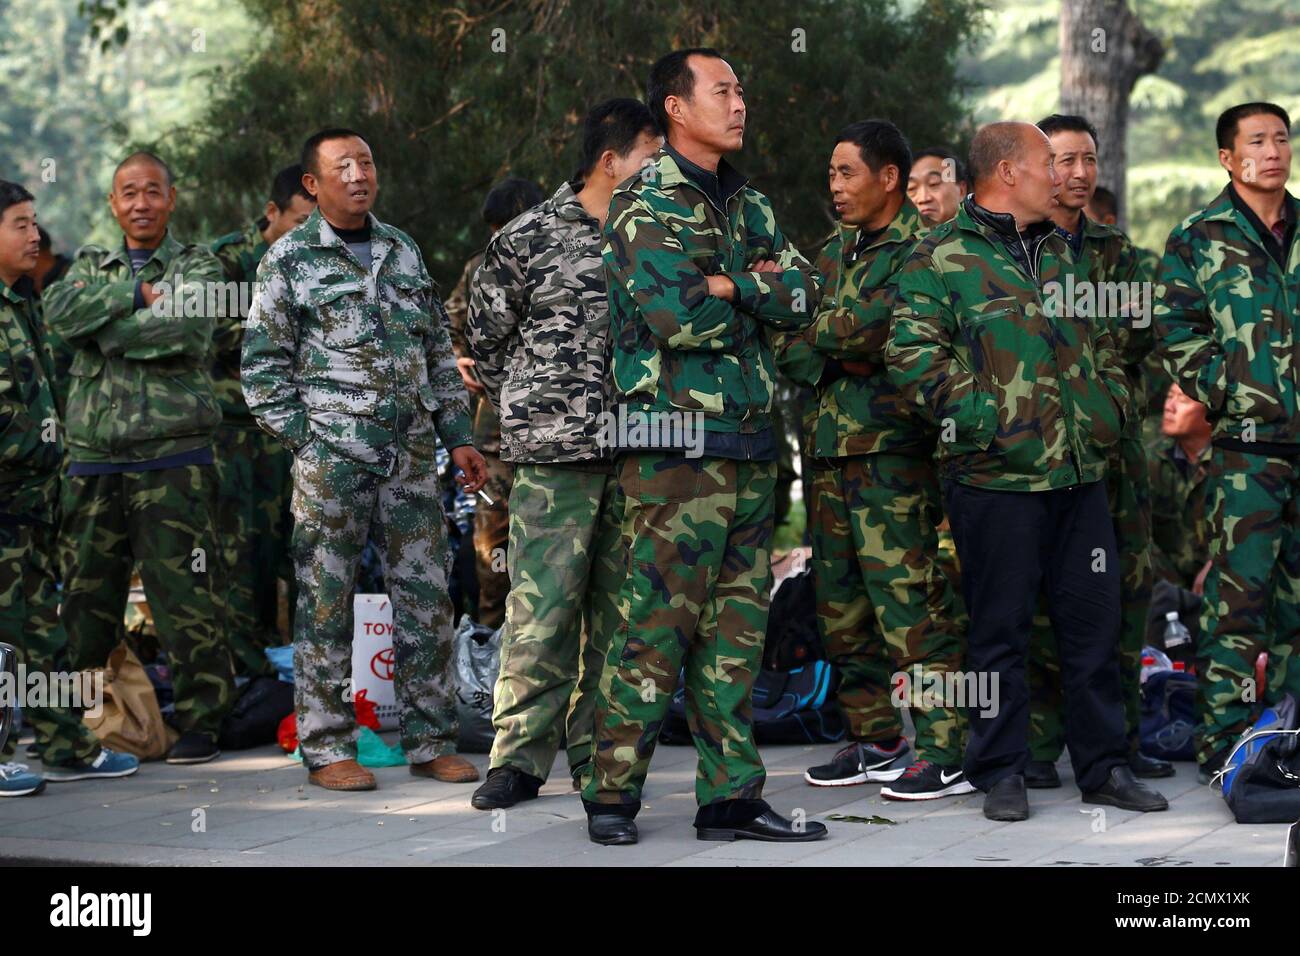 Uniformed people take part in a protest outside the Bayi Building, a major Chinese military building in Beijing, China, October 11, 2016.  REUTERS/Thomas Peter Stock Photo